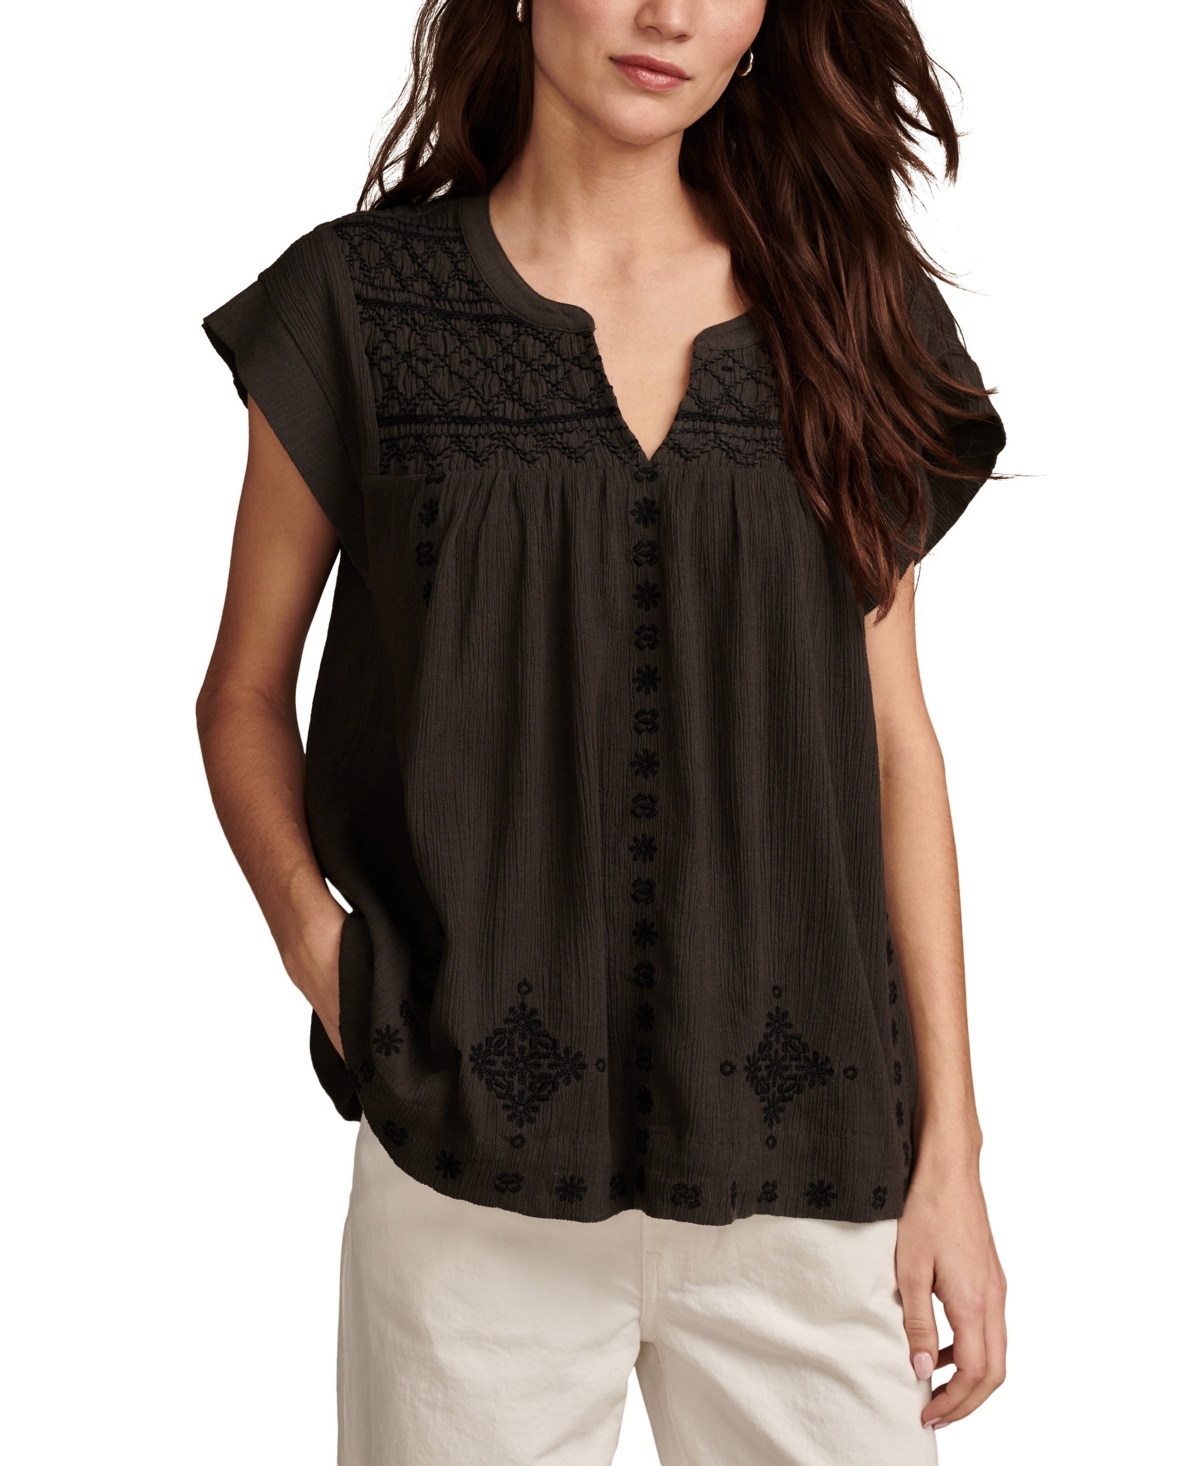 LUCKY BRAND WOMEN'S COTTON SMOCKED EMBROIDERED POPOVER BLOUSE